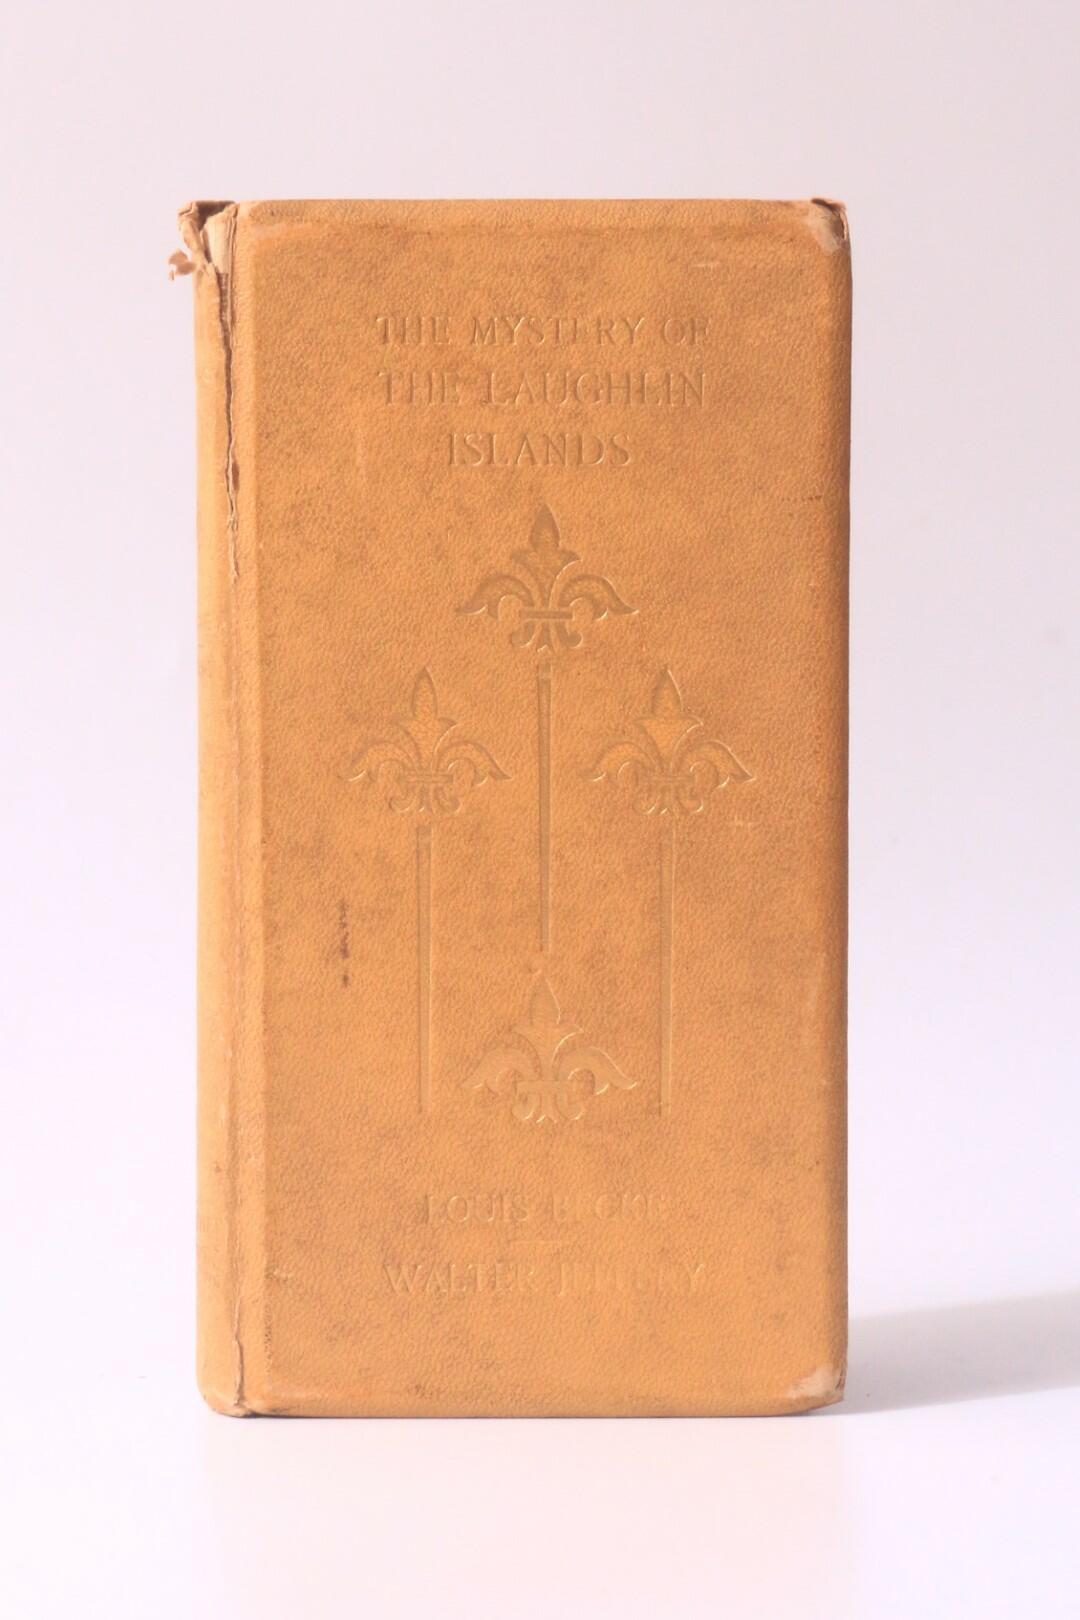 Louis Becke and Walter Jeffrey - The Mystery of the Laughlin Islands - T. Fisher Unwin, 1896, First Edition.